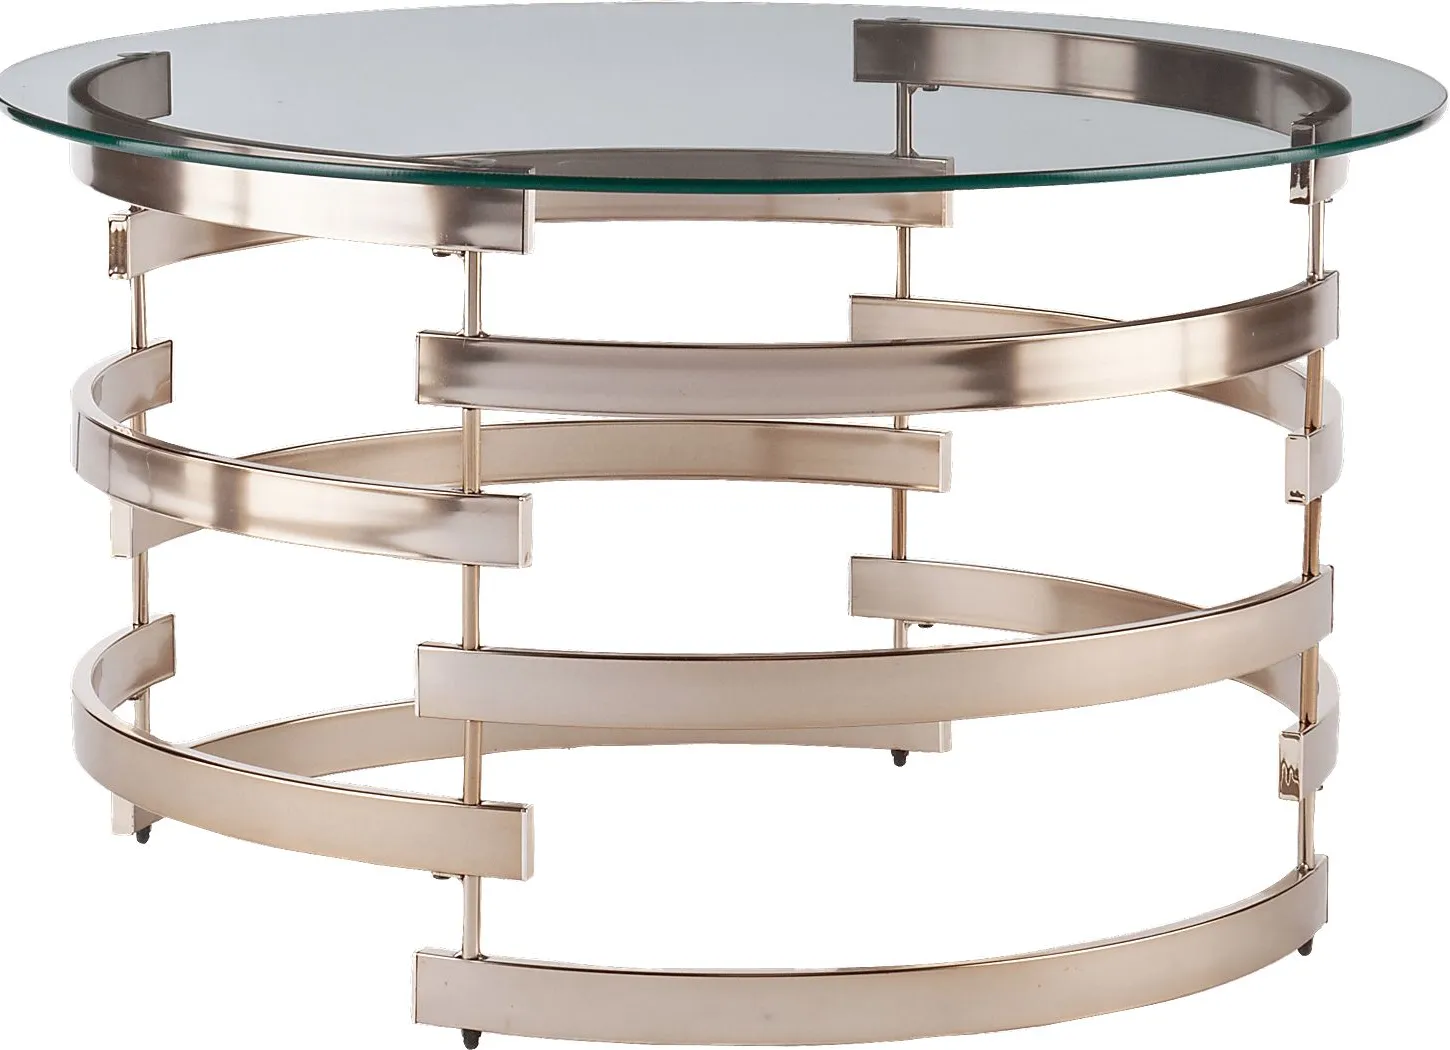 Bryden Gold Cocktail Table